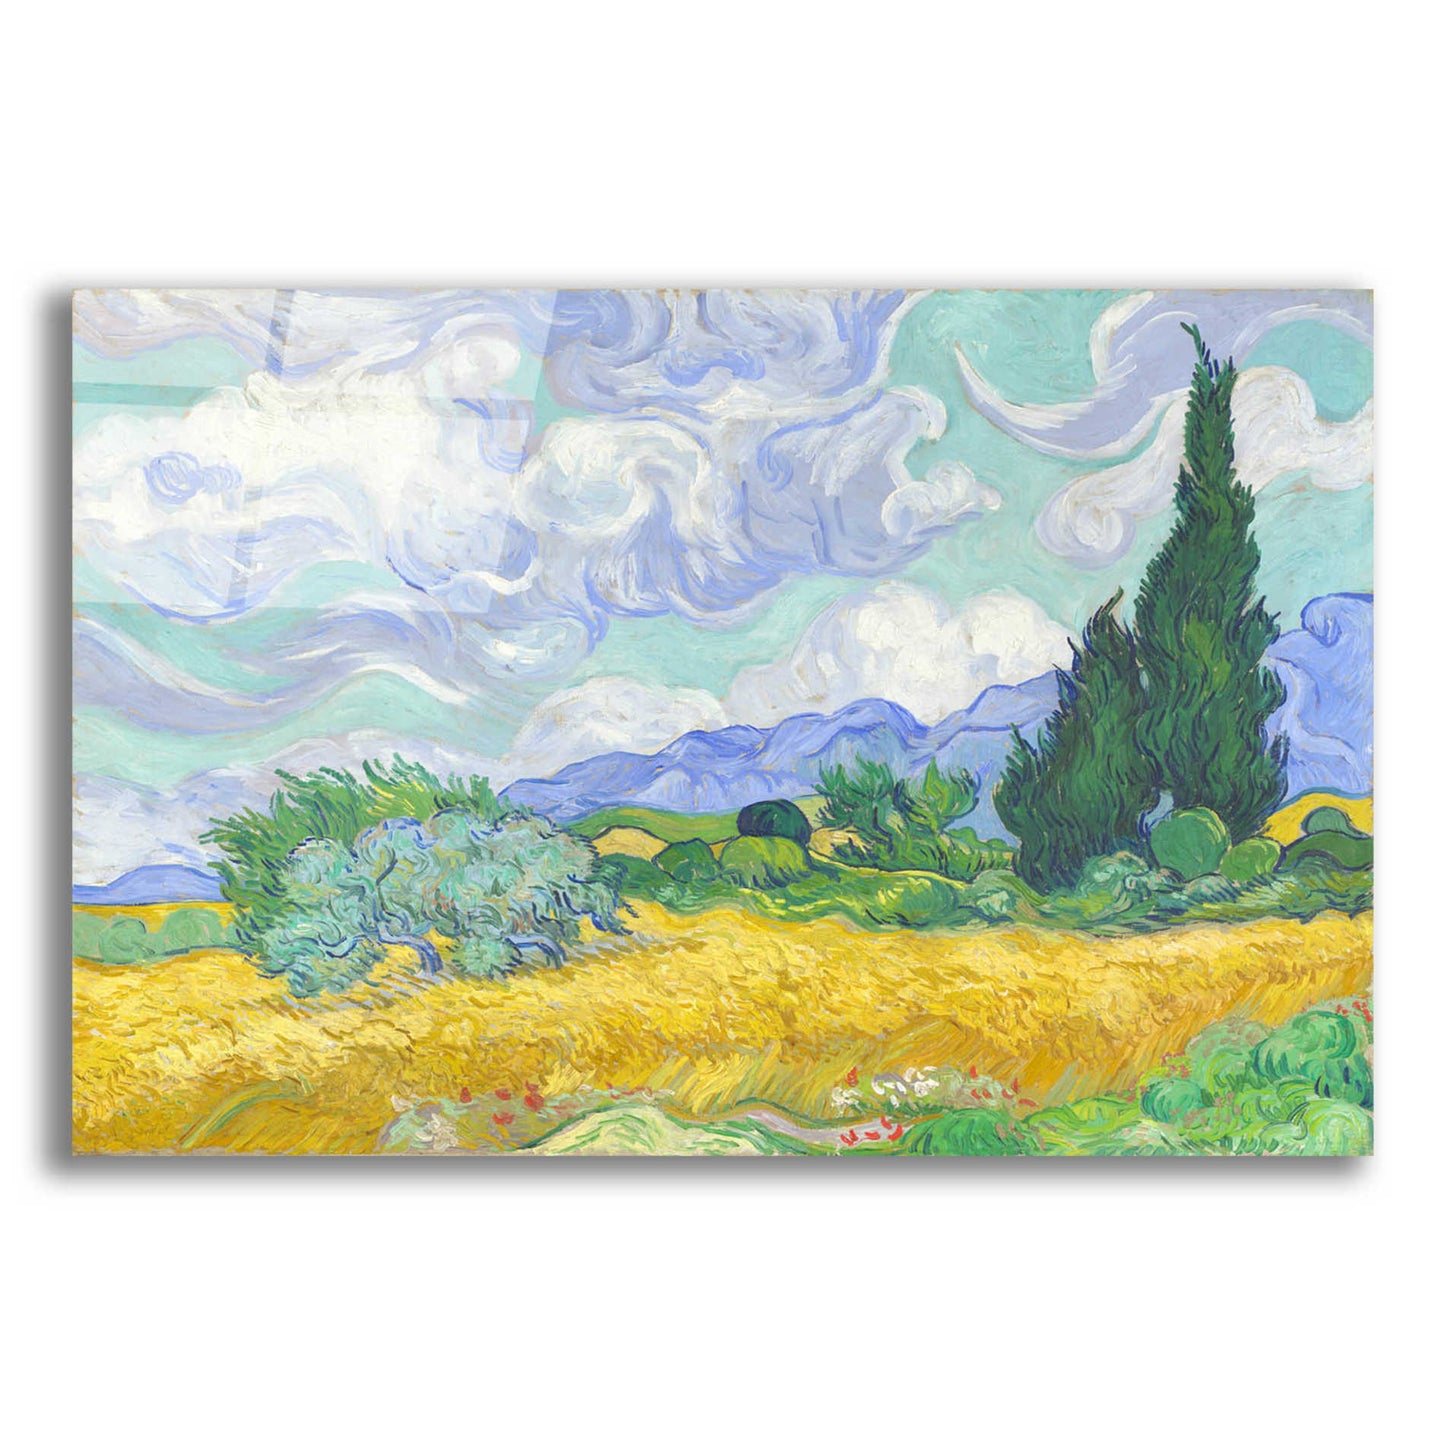 Epic Art 'Wheat Field with Cypresses' by Vincent van Gogh, Acrylic Glass Wall Art,16x12x1.1x0,26x18x1.1x0,34x26x1.74x0,54x40x1.74x0